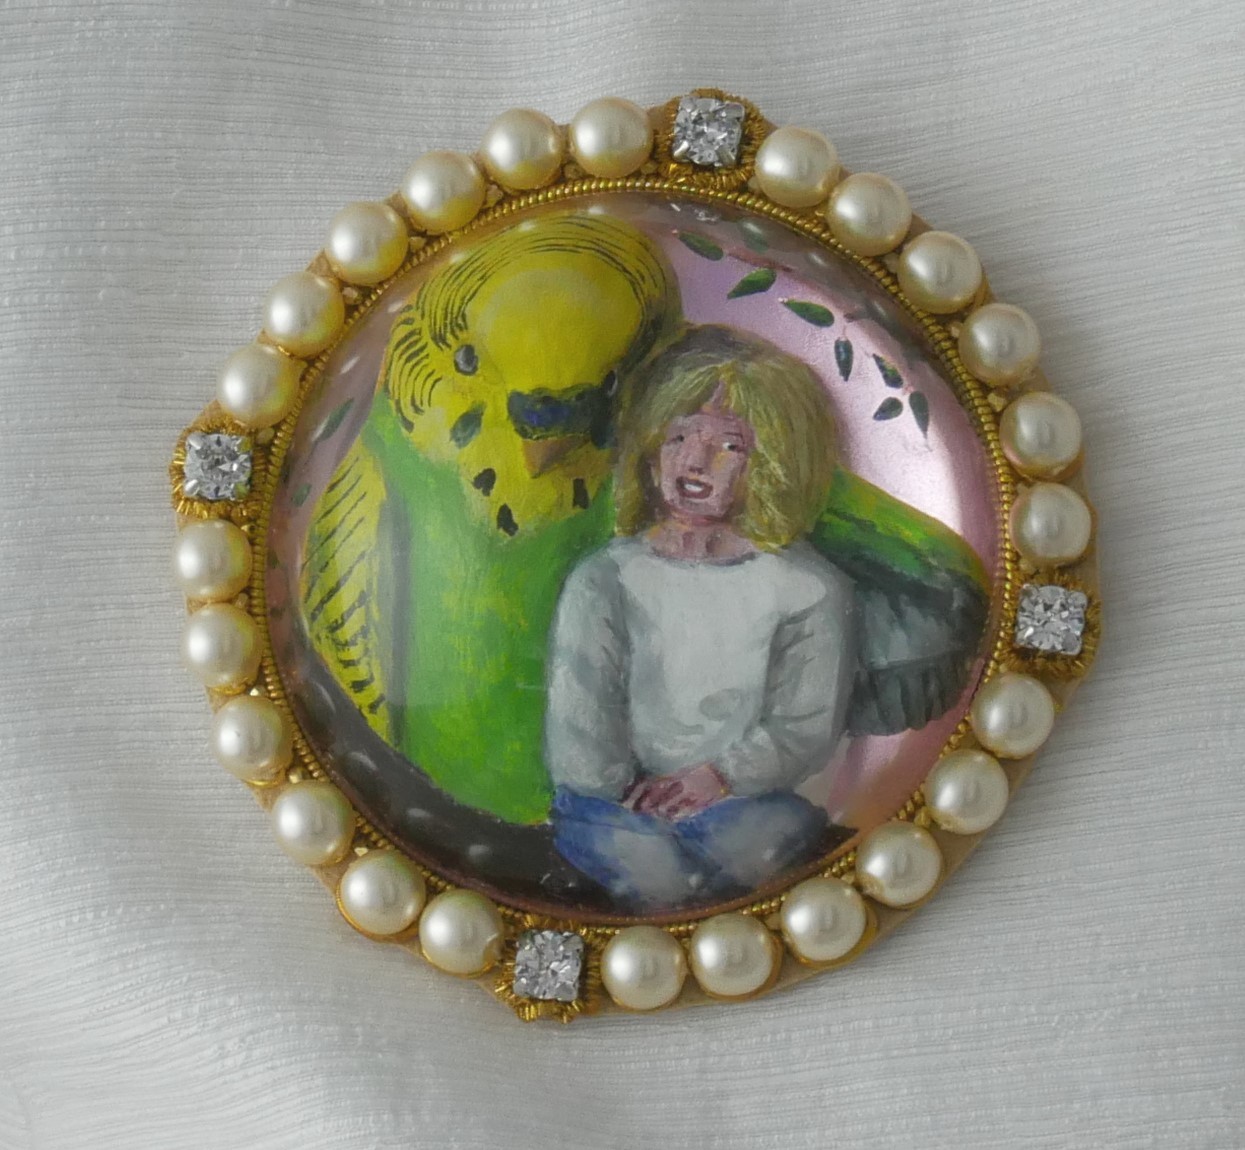 Reverse intaglio cast glass, carved and enamel painted crystal showing a large budieg alongside a small girl
